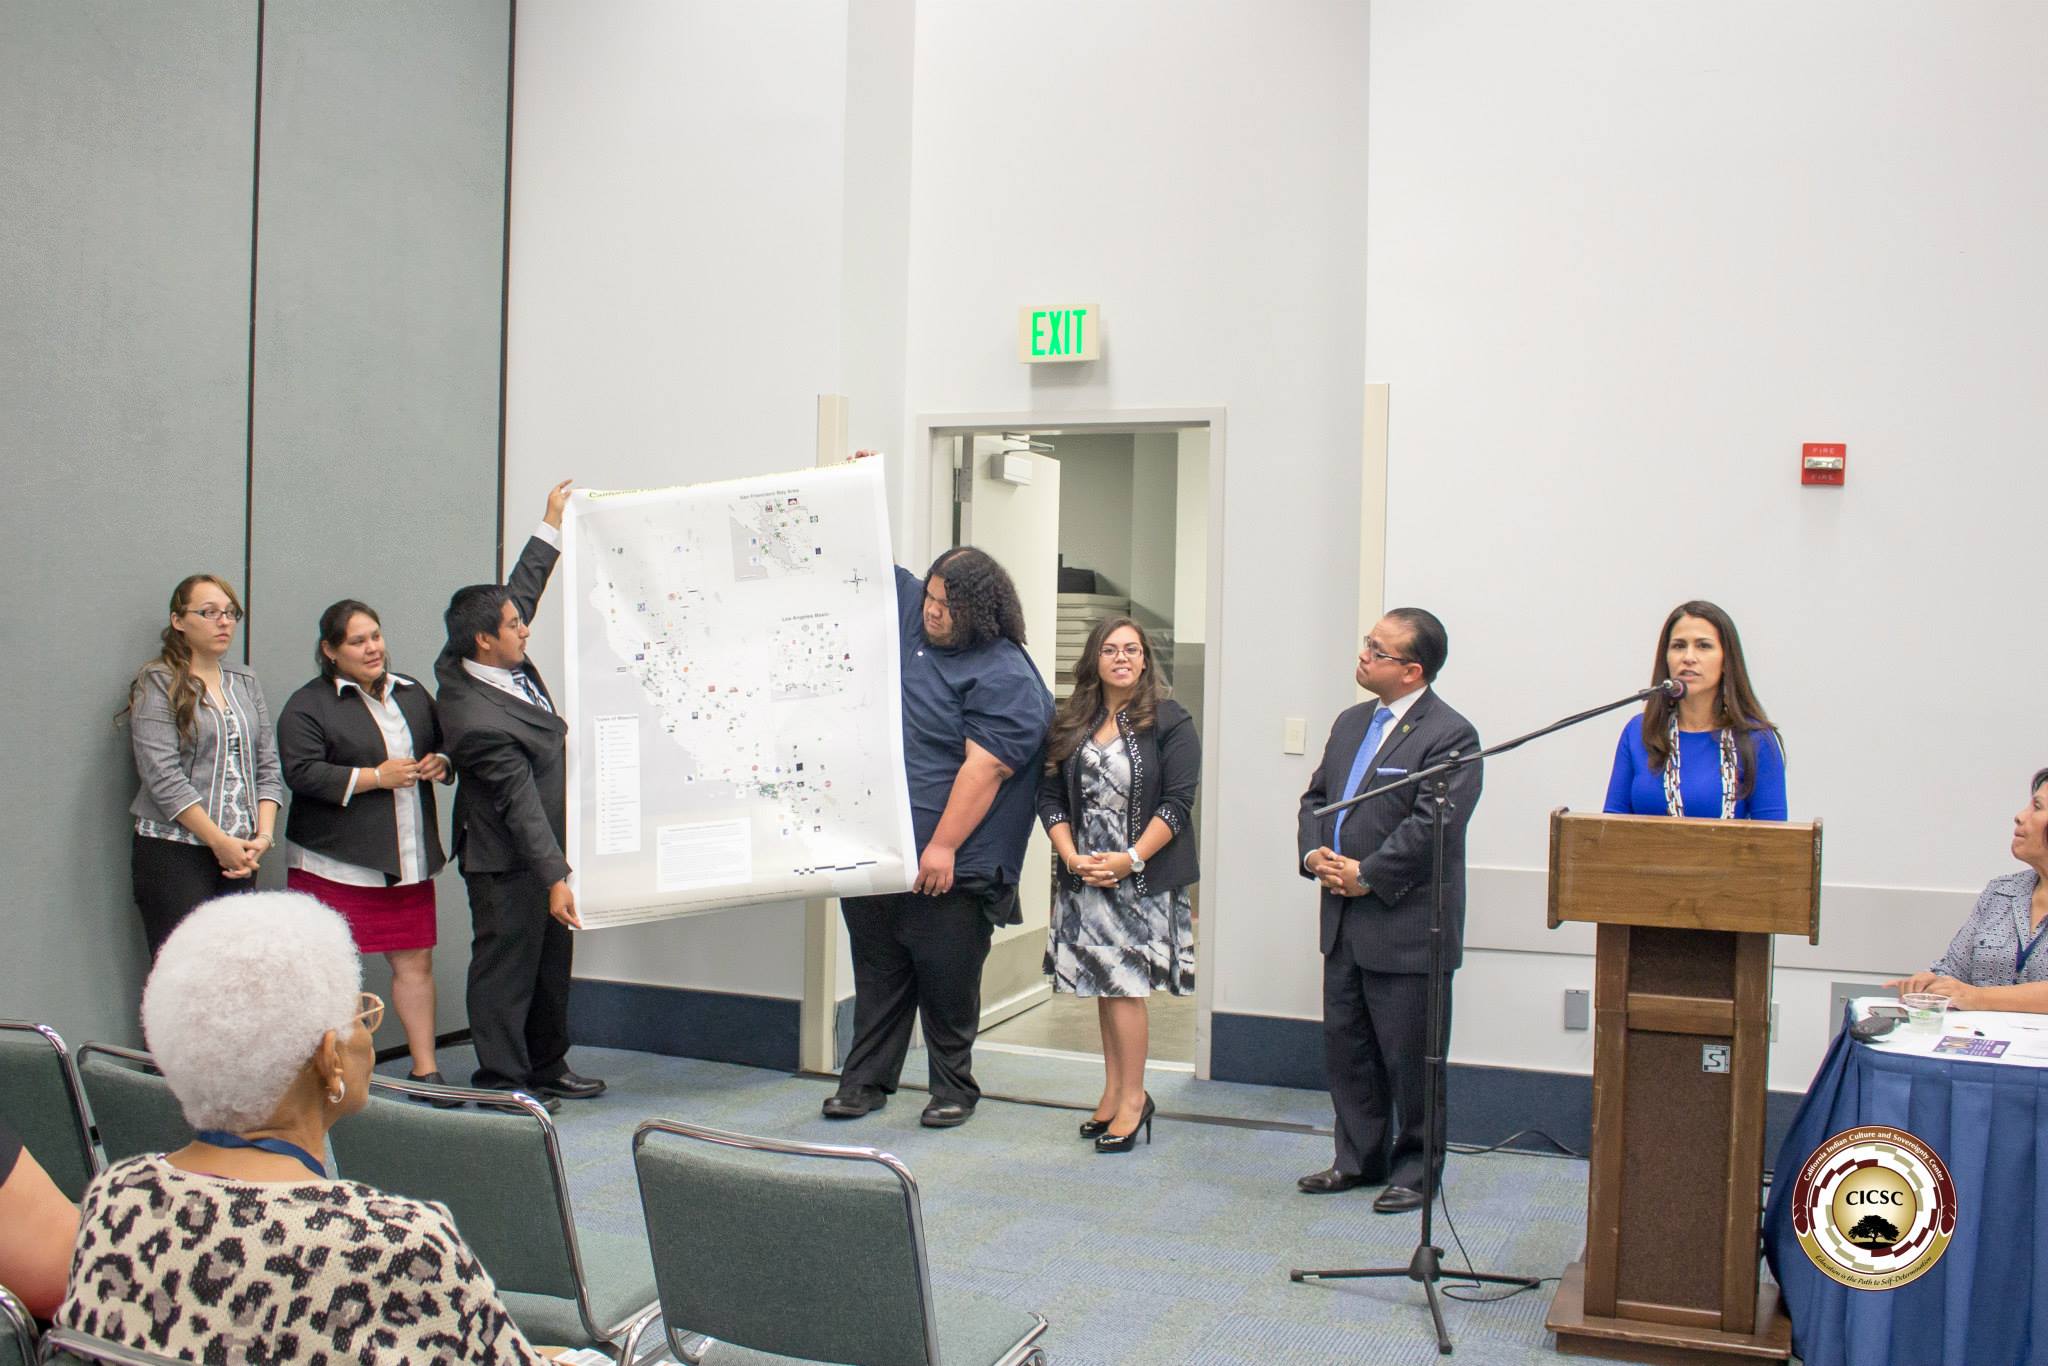 Dr. Joely Proudfit speaking at a podium and students from CSUSM's American Indian Student Alliance standing in front of the room, holding and standing around a large GIS research poster, as people in the audience and someone at a panel table next to Dr. Proudfit listen to the presentation